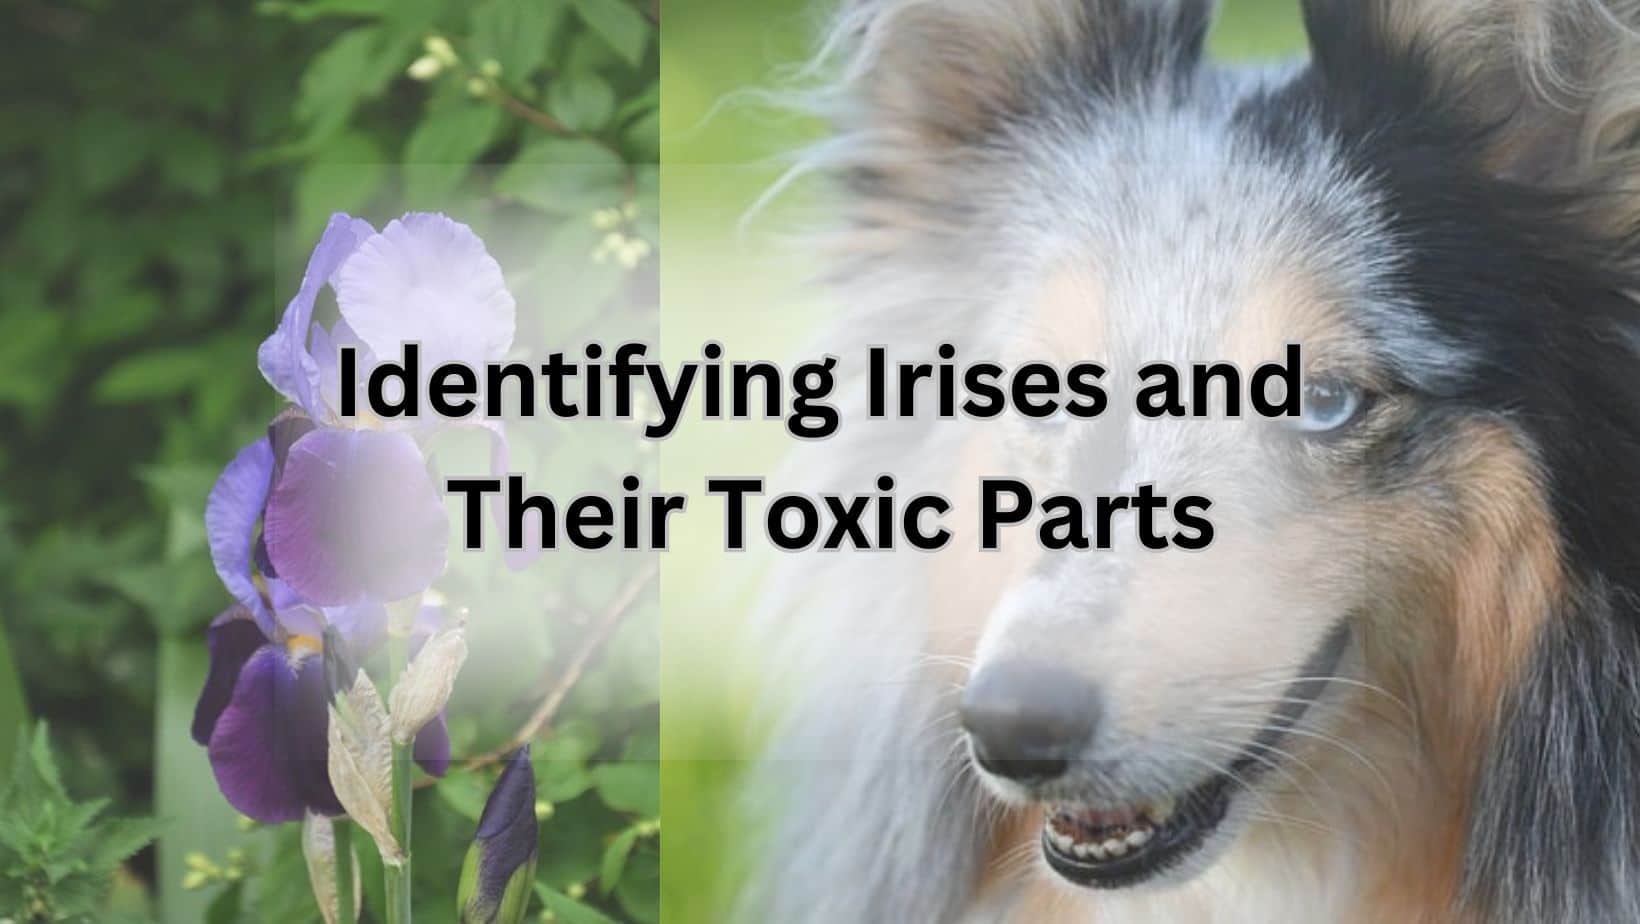 Identifying Irises and Their Toxic Parts